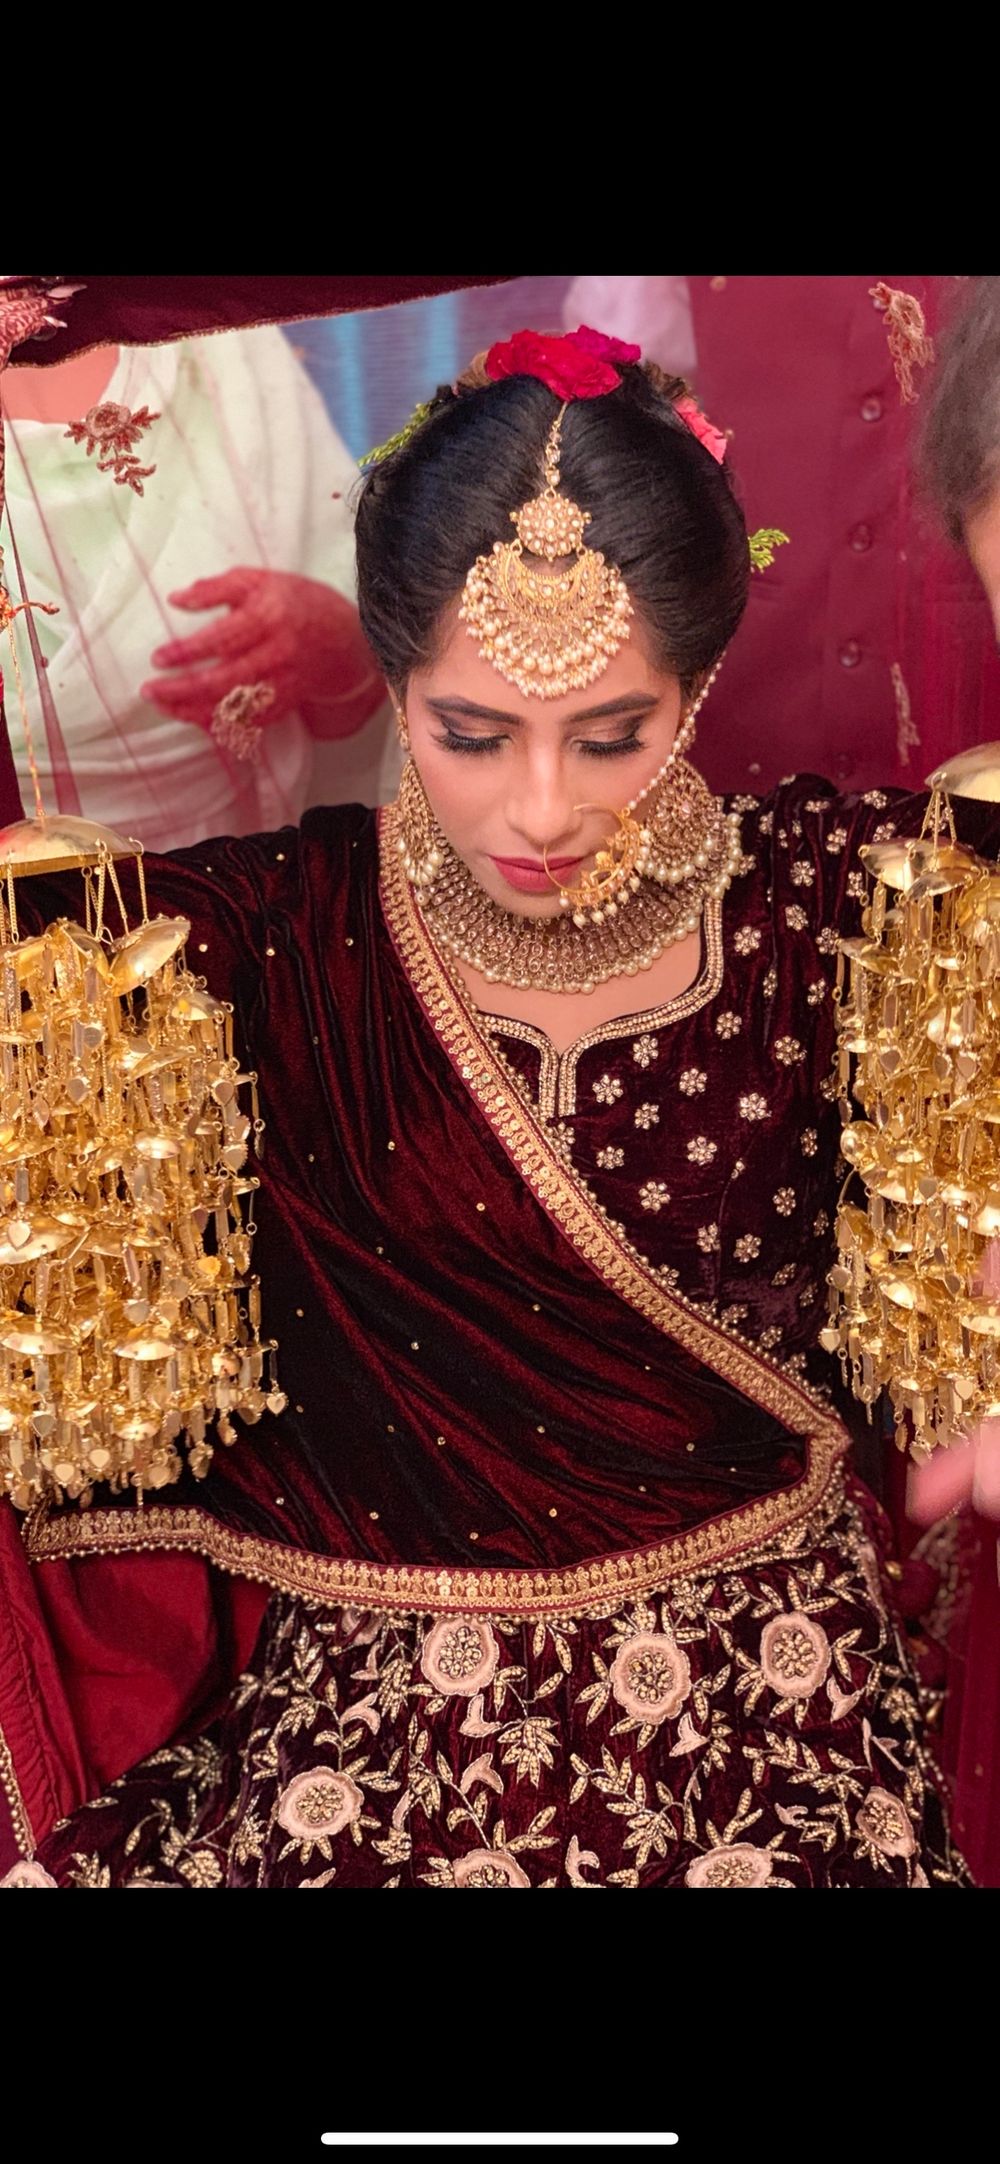 Photo From SURREAL SIKH BRIDE MANPREET - By Makeup and Hair by Sehej